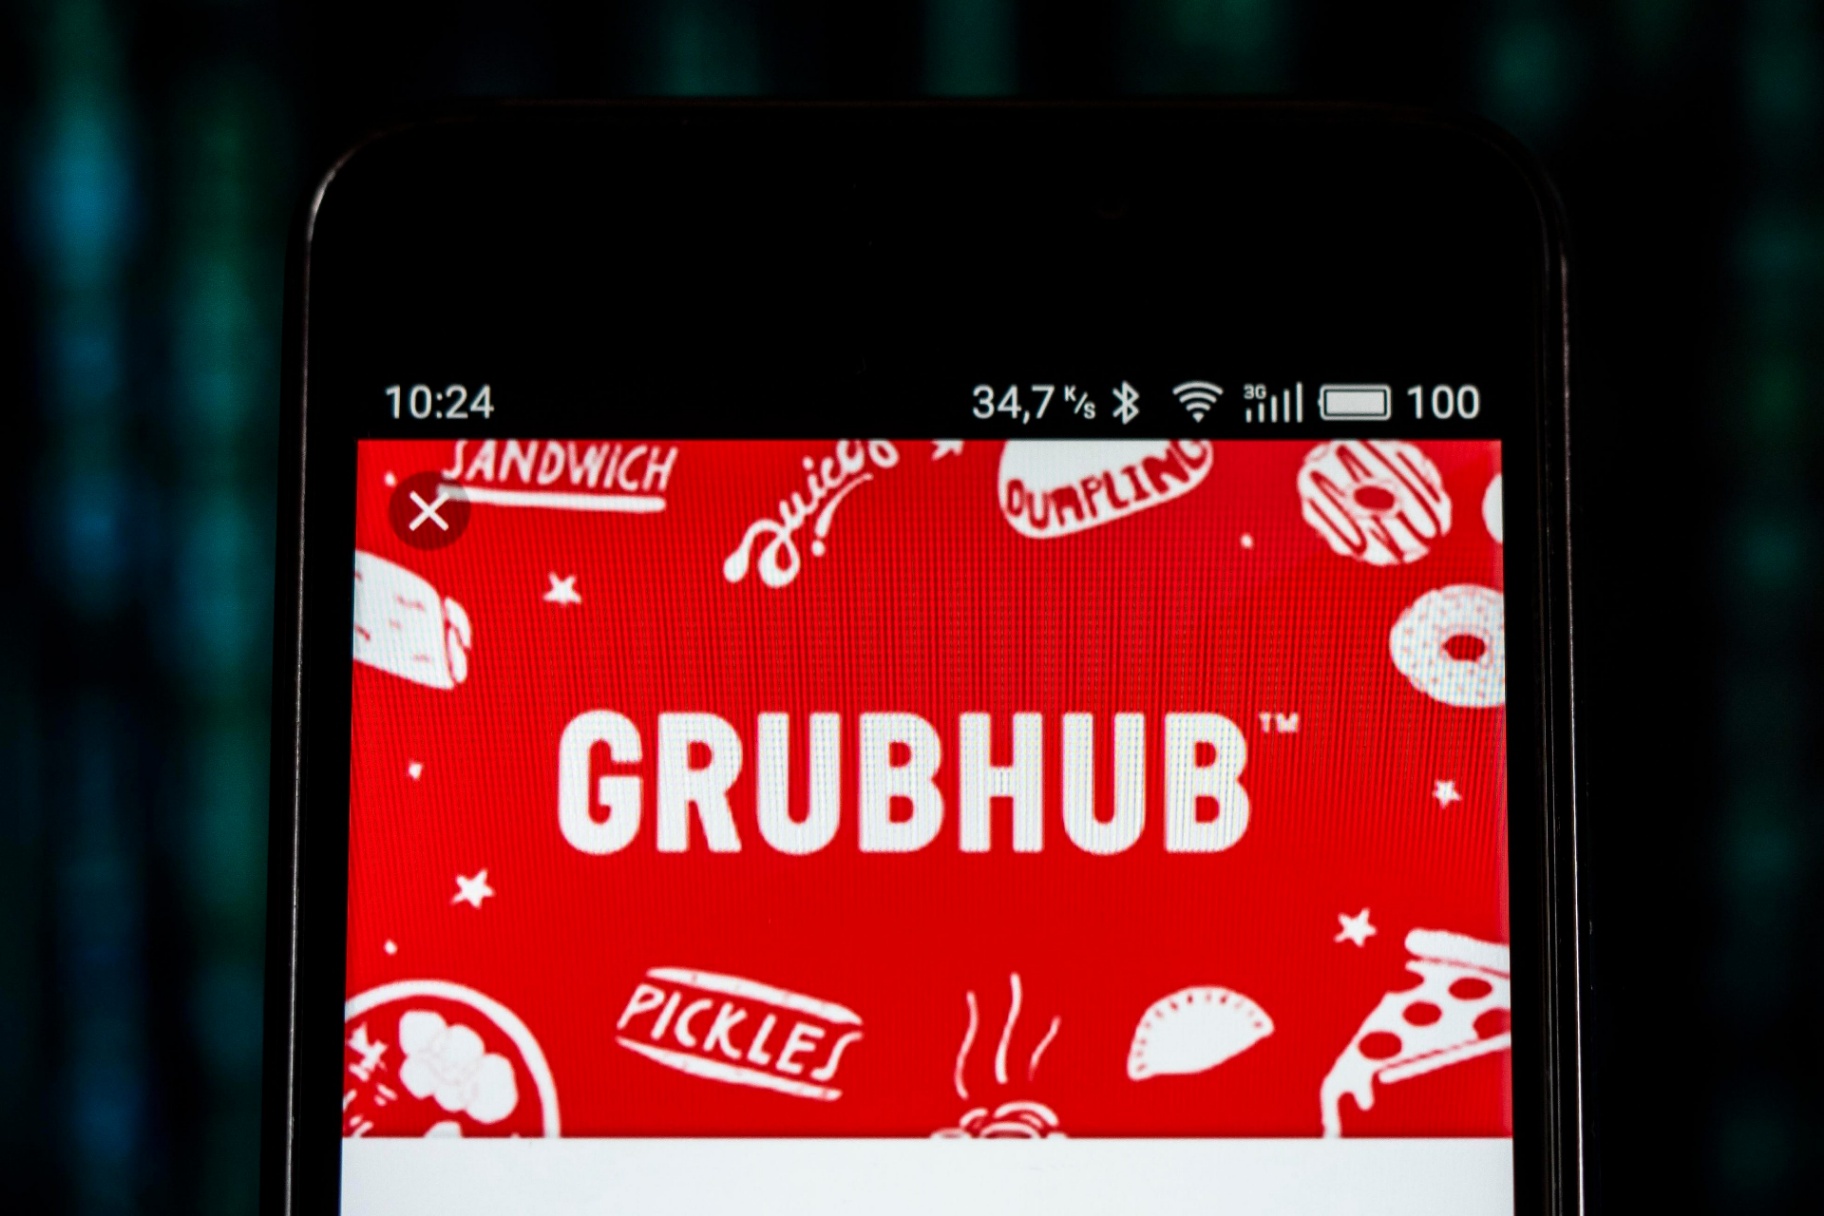 Grubhub App - Find Local Food Delivery